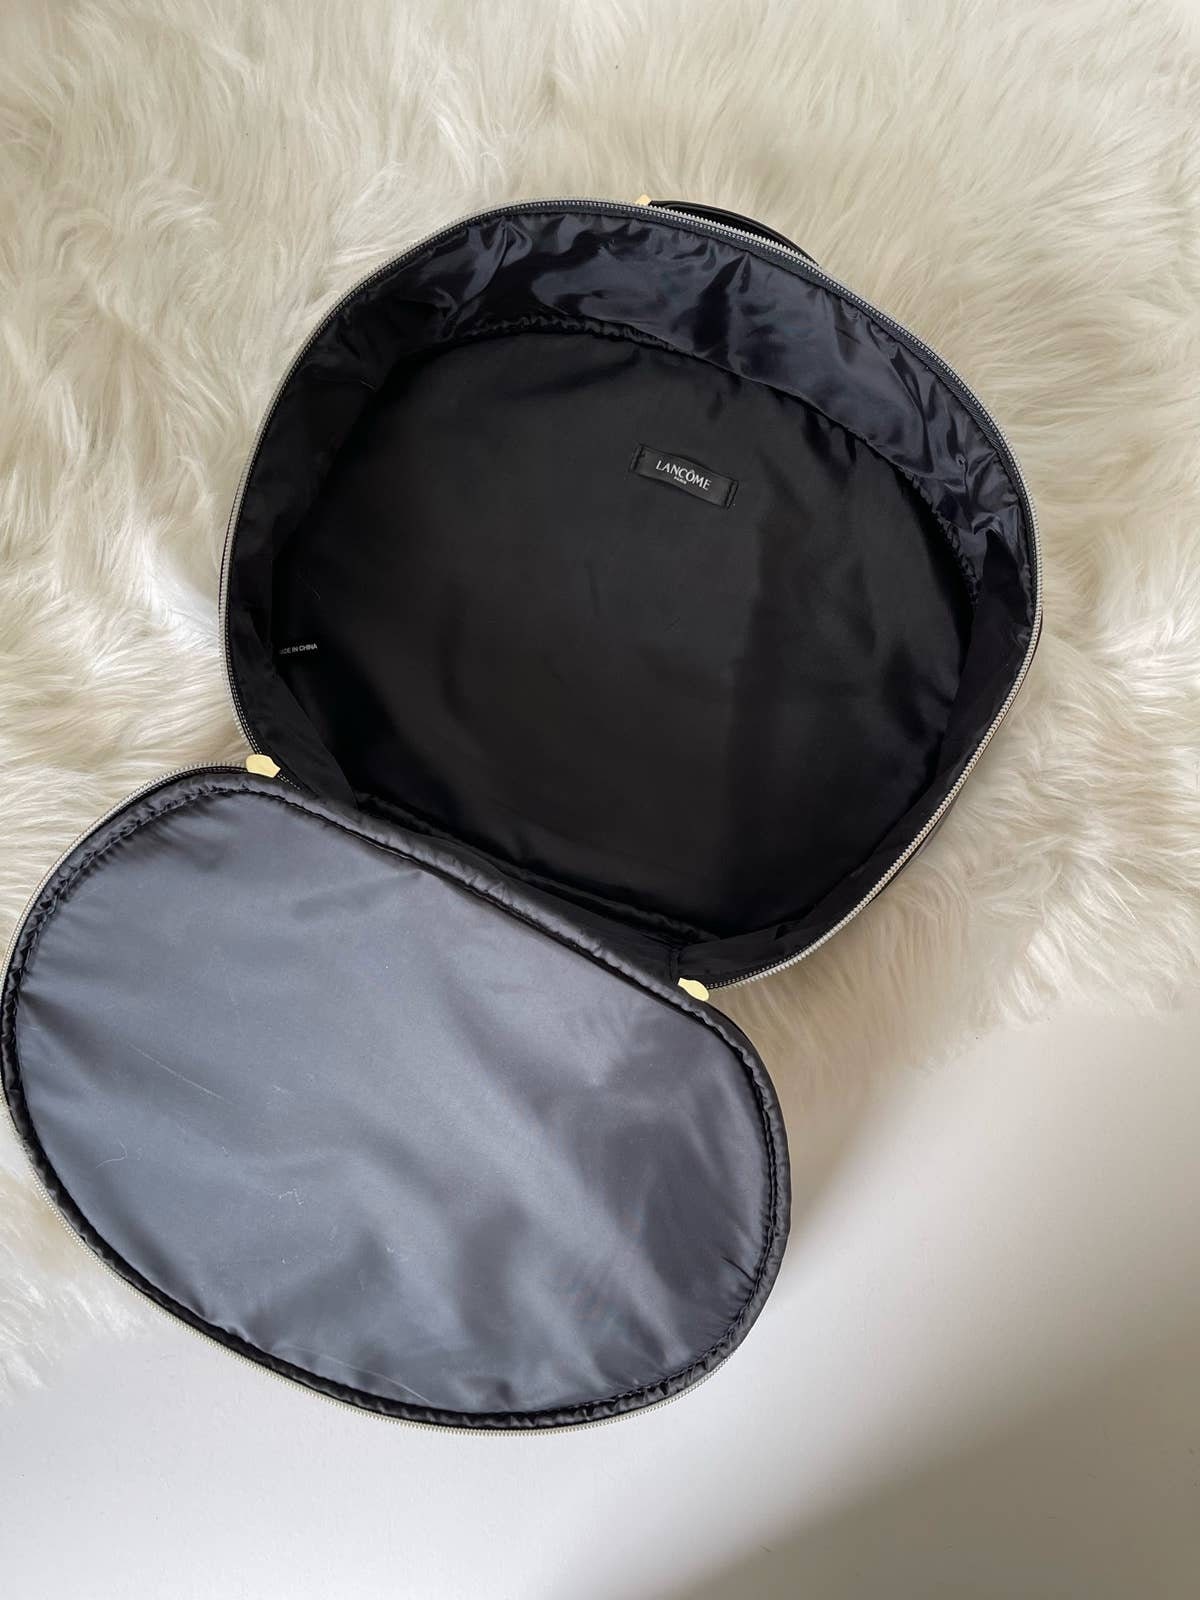 NEW Lancôme Black Patent Leather Round Handle Cosmetic Bag 